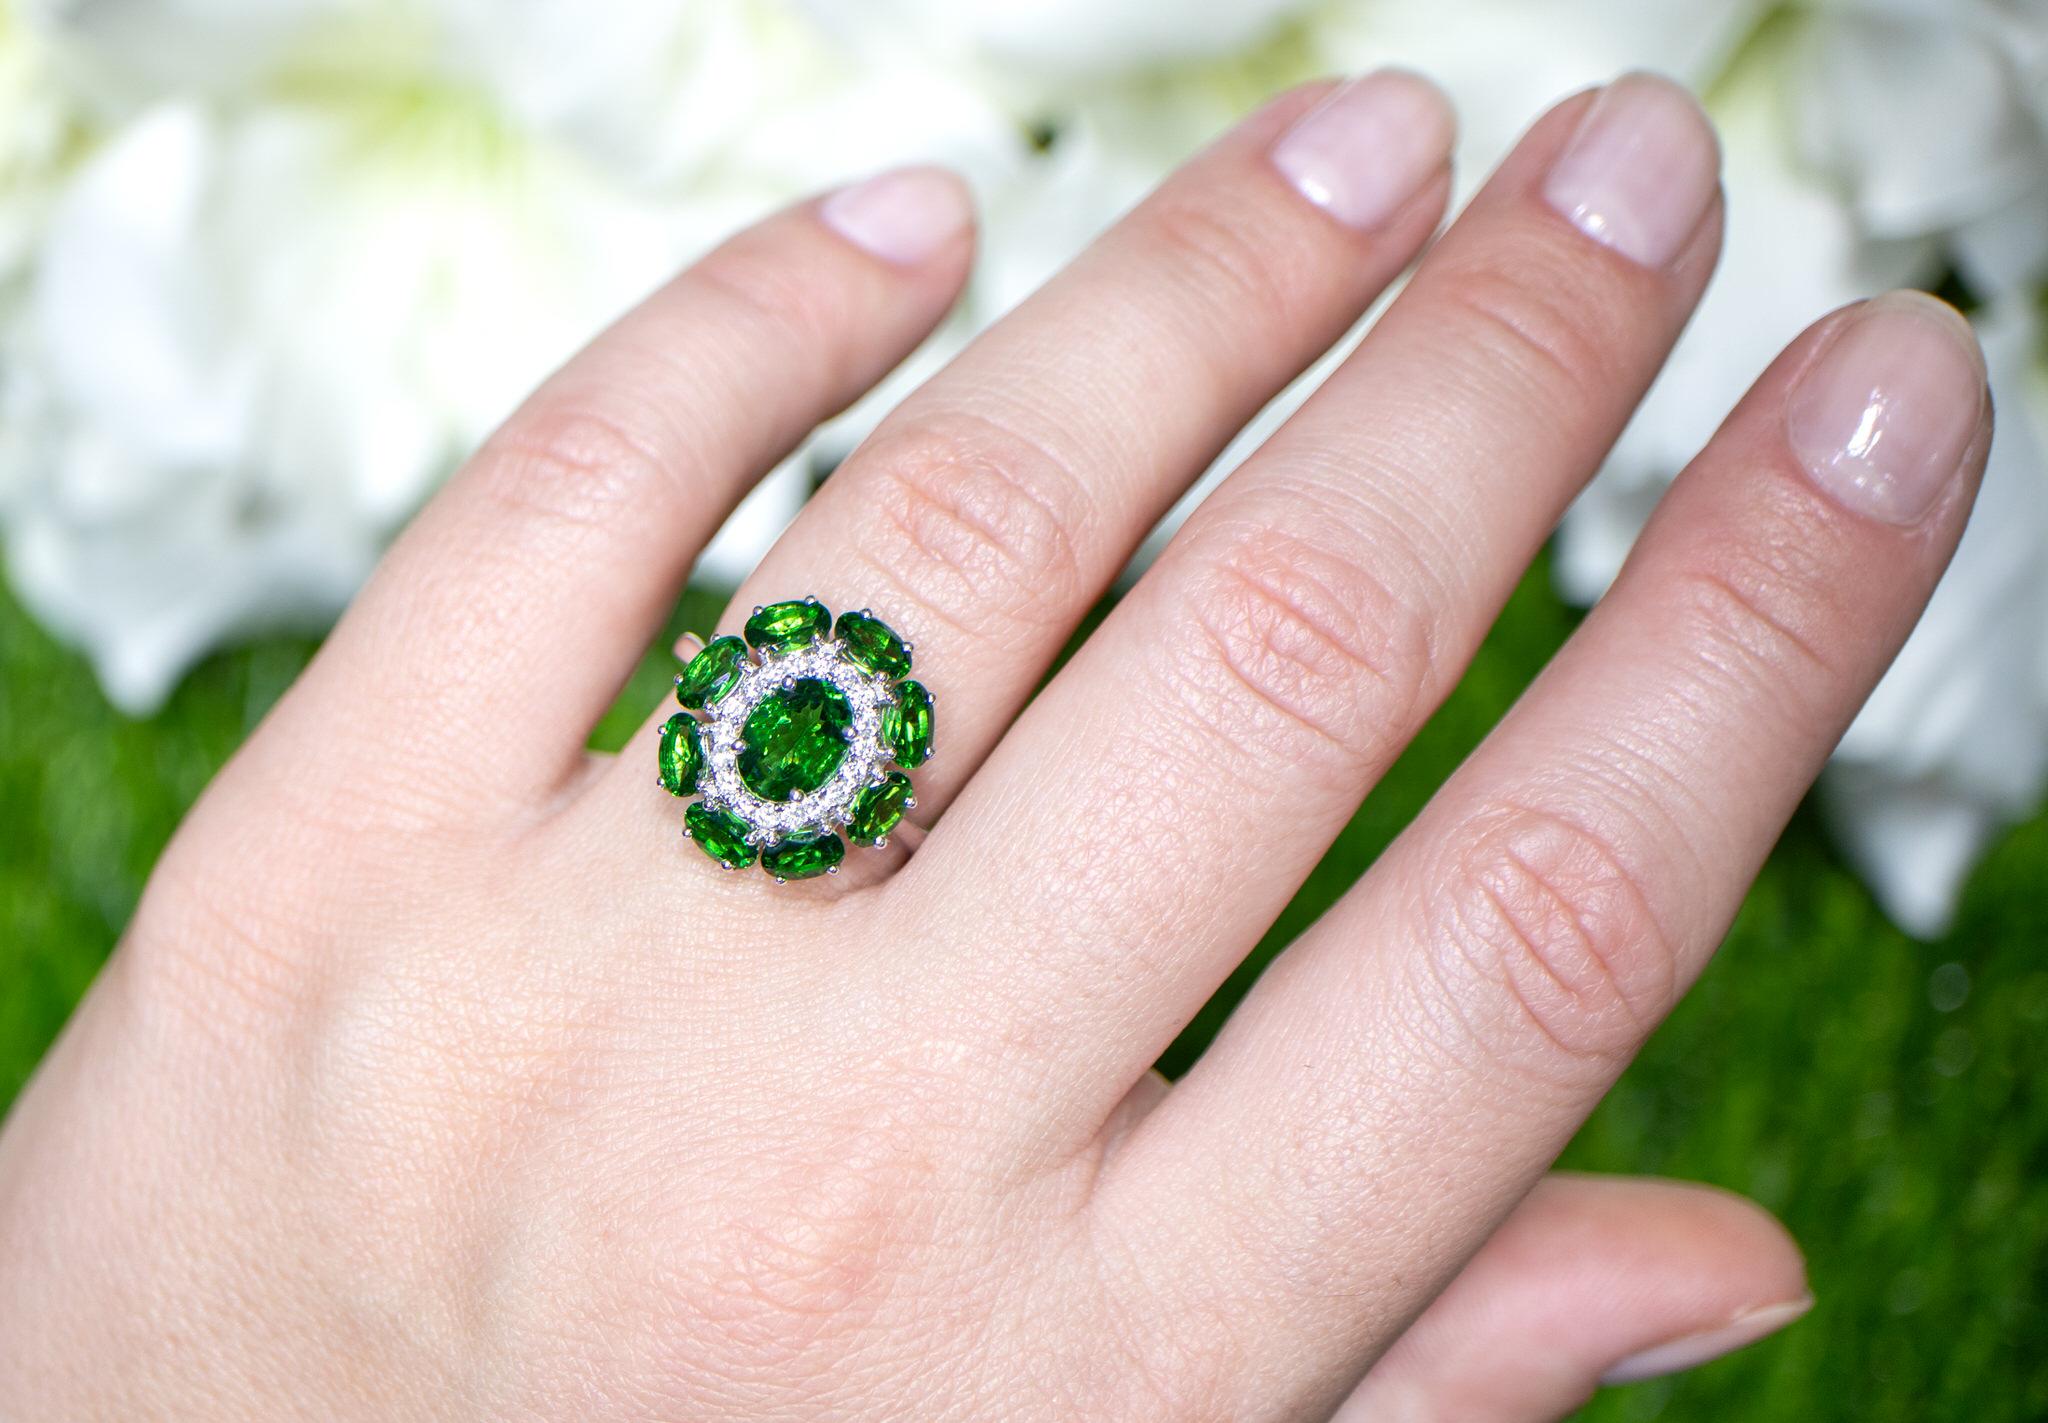 It comes with the Gemological Appraisal by GIA GG/AJP
All Gemstones are Natural
Tsavorites = 3.34 Carats
Diamonds = 0.22 Carats
Metal: 18K White Gold
Ring Size: 6.5* US
*It can be resized complimentary